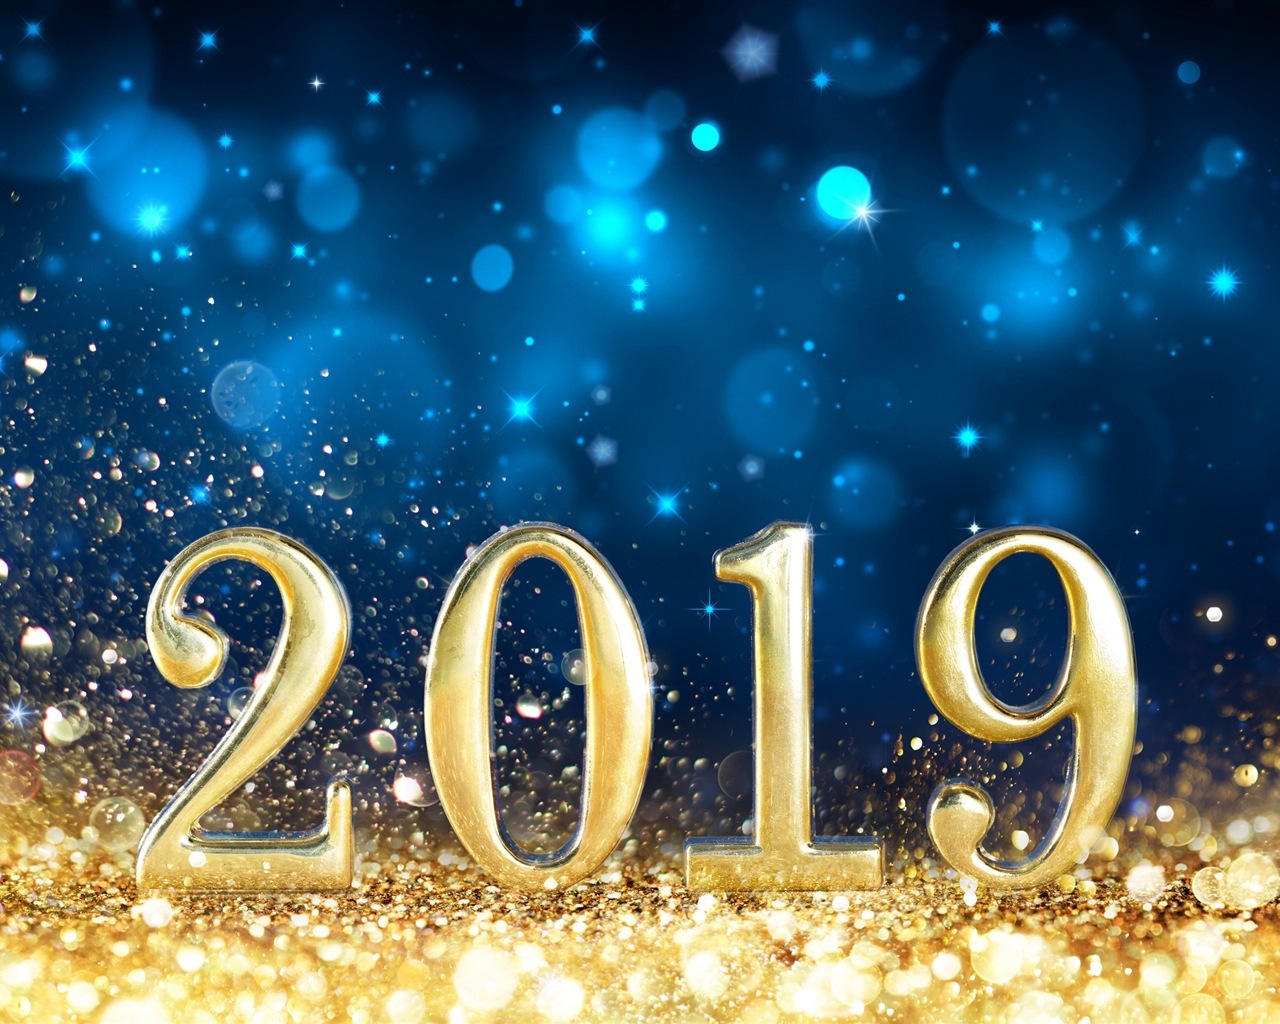 Happy New Year 2019 HD wallpapers #5 - 1280x1024